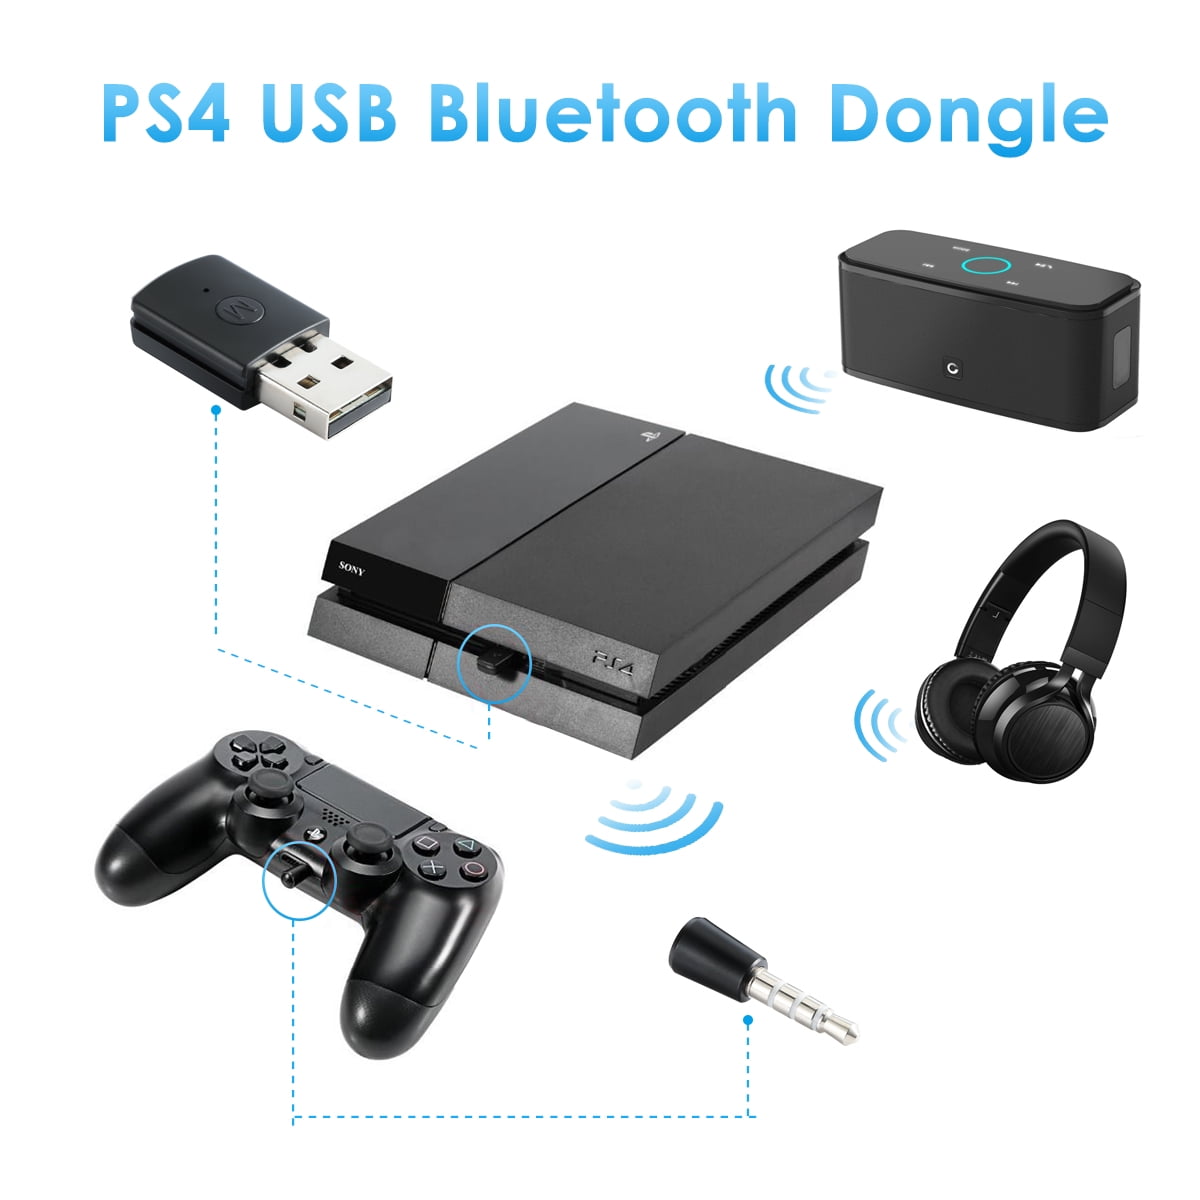 Bluetooth Dongle Latest Version Usb Adapter Wireless Receiver For Ps4 Headset Playstation 4 Wireless Ps4 Bluetooth Adapter Receiver Microphone Walmart Com Walmart Com